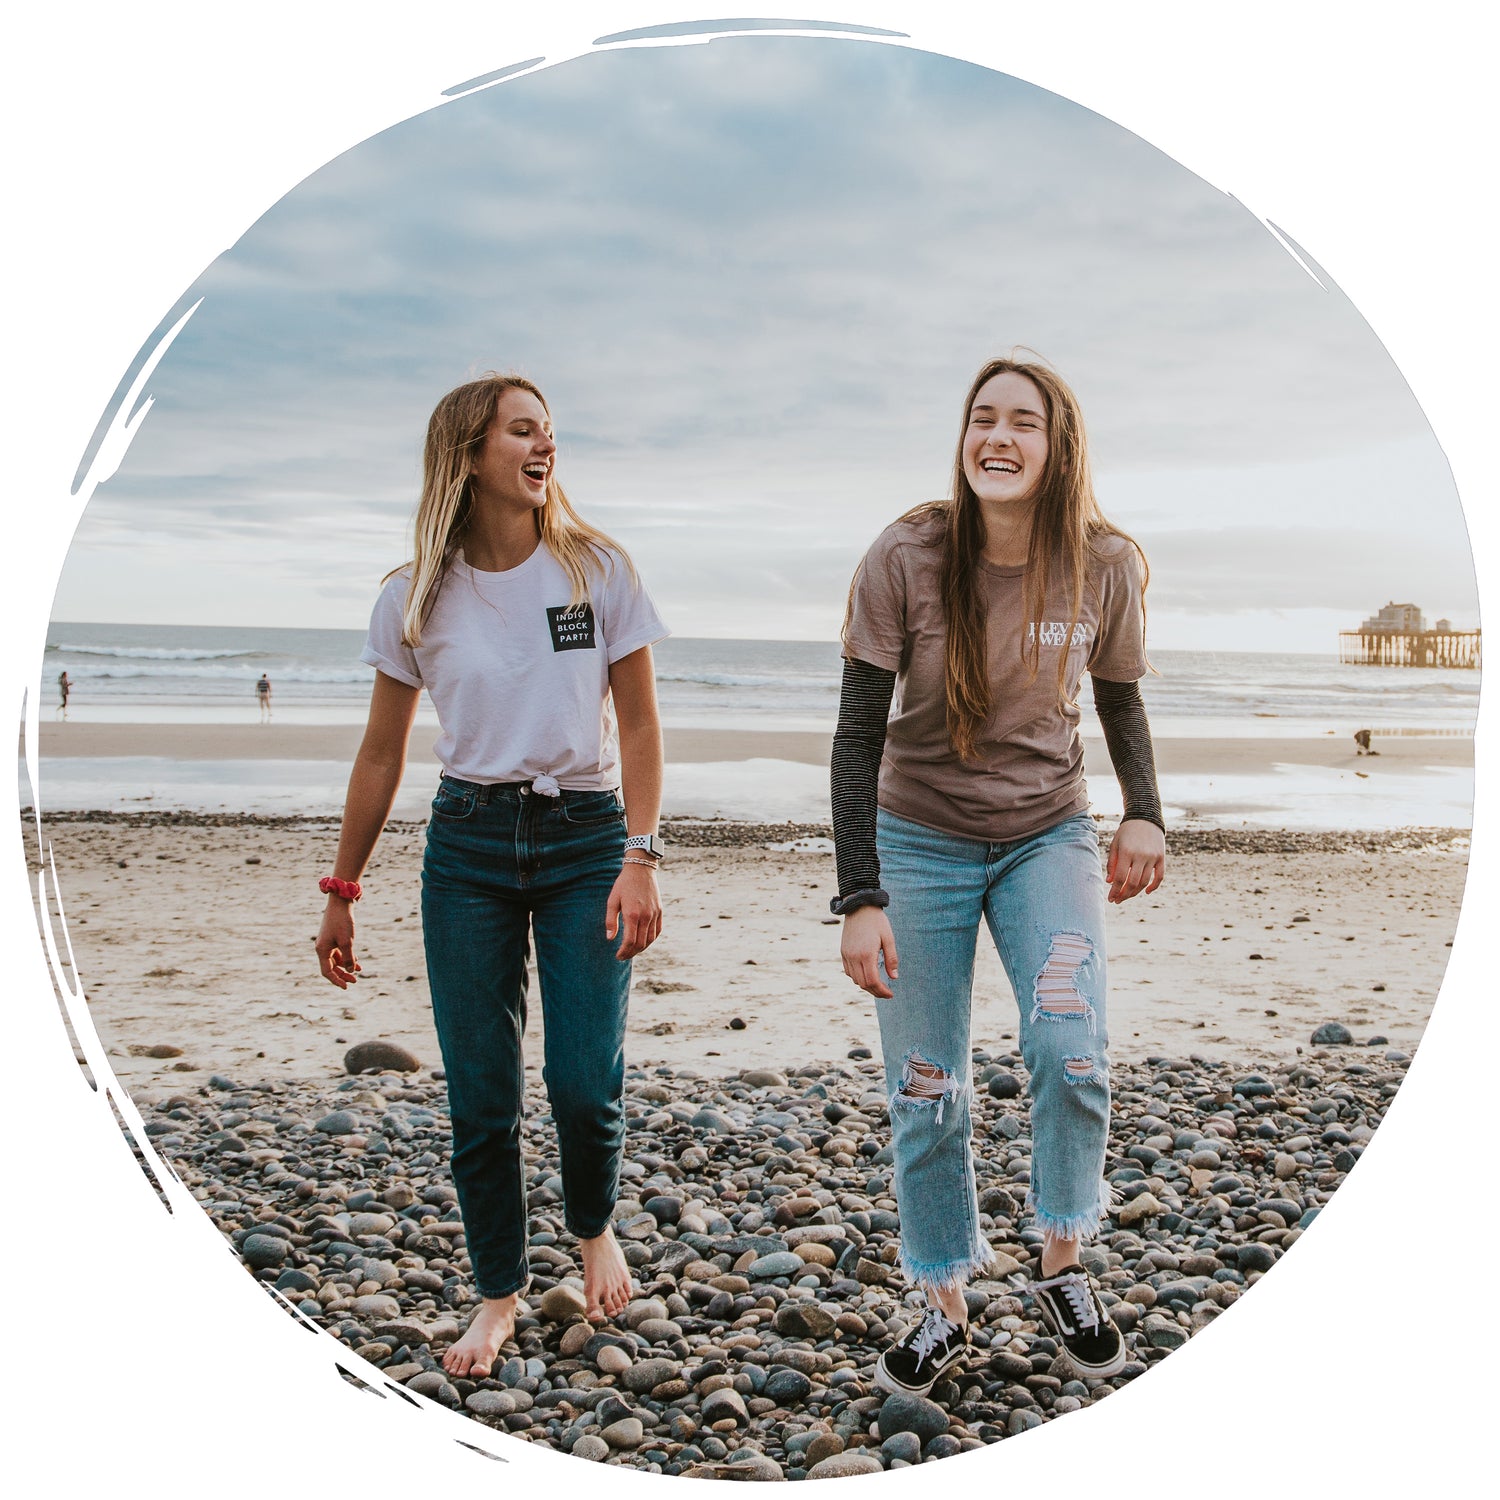 two friends laughing while walking on a beach - getpinkfit Brand Ambassador Program